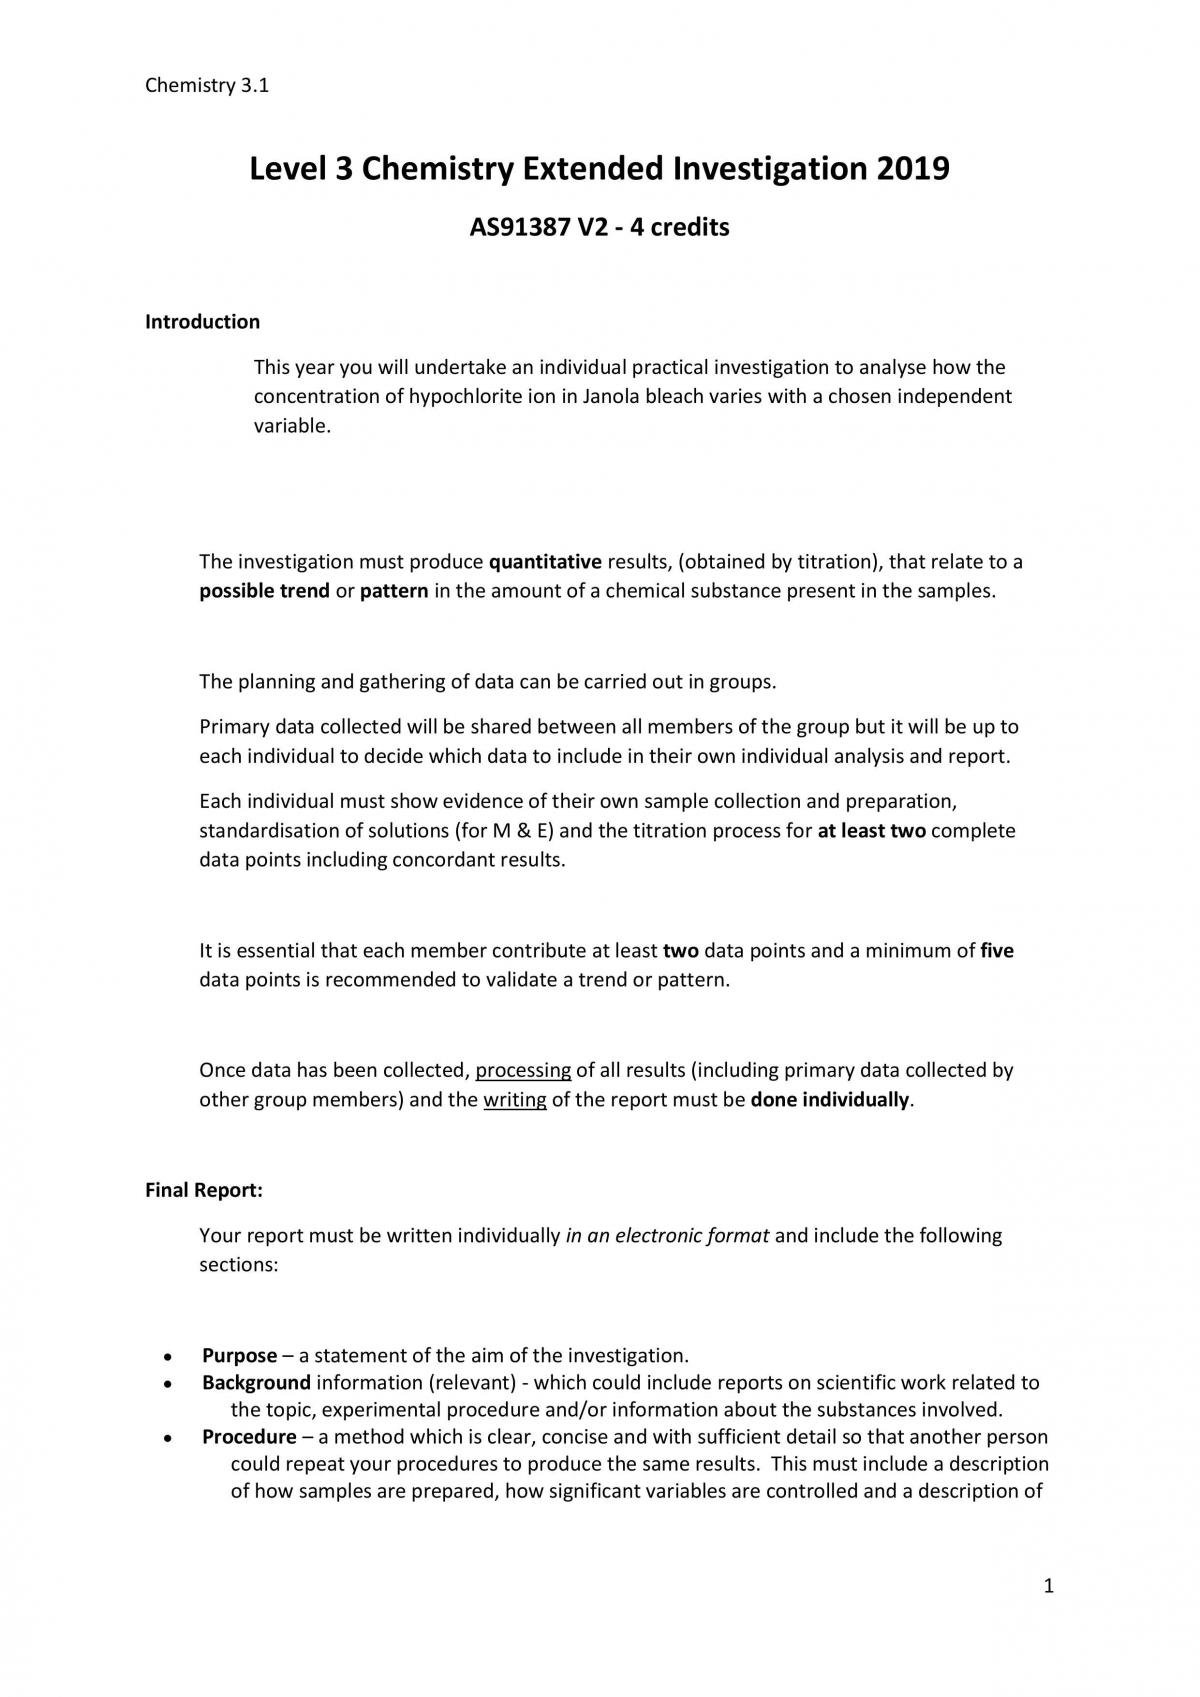 Carry out an investigation in chemistry involving quantitative analysis - Page 1